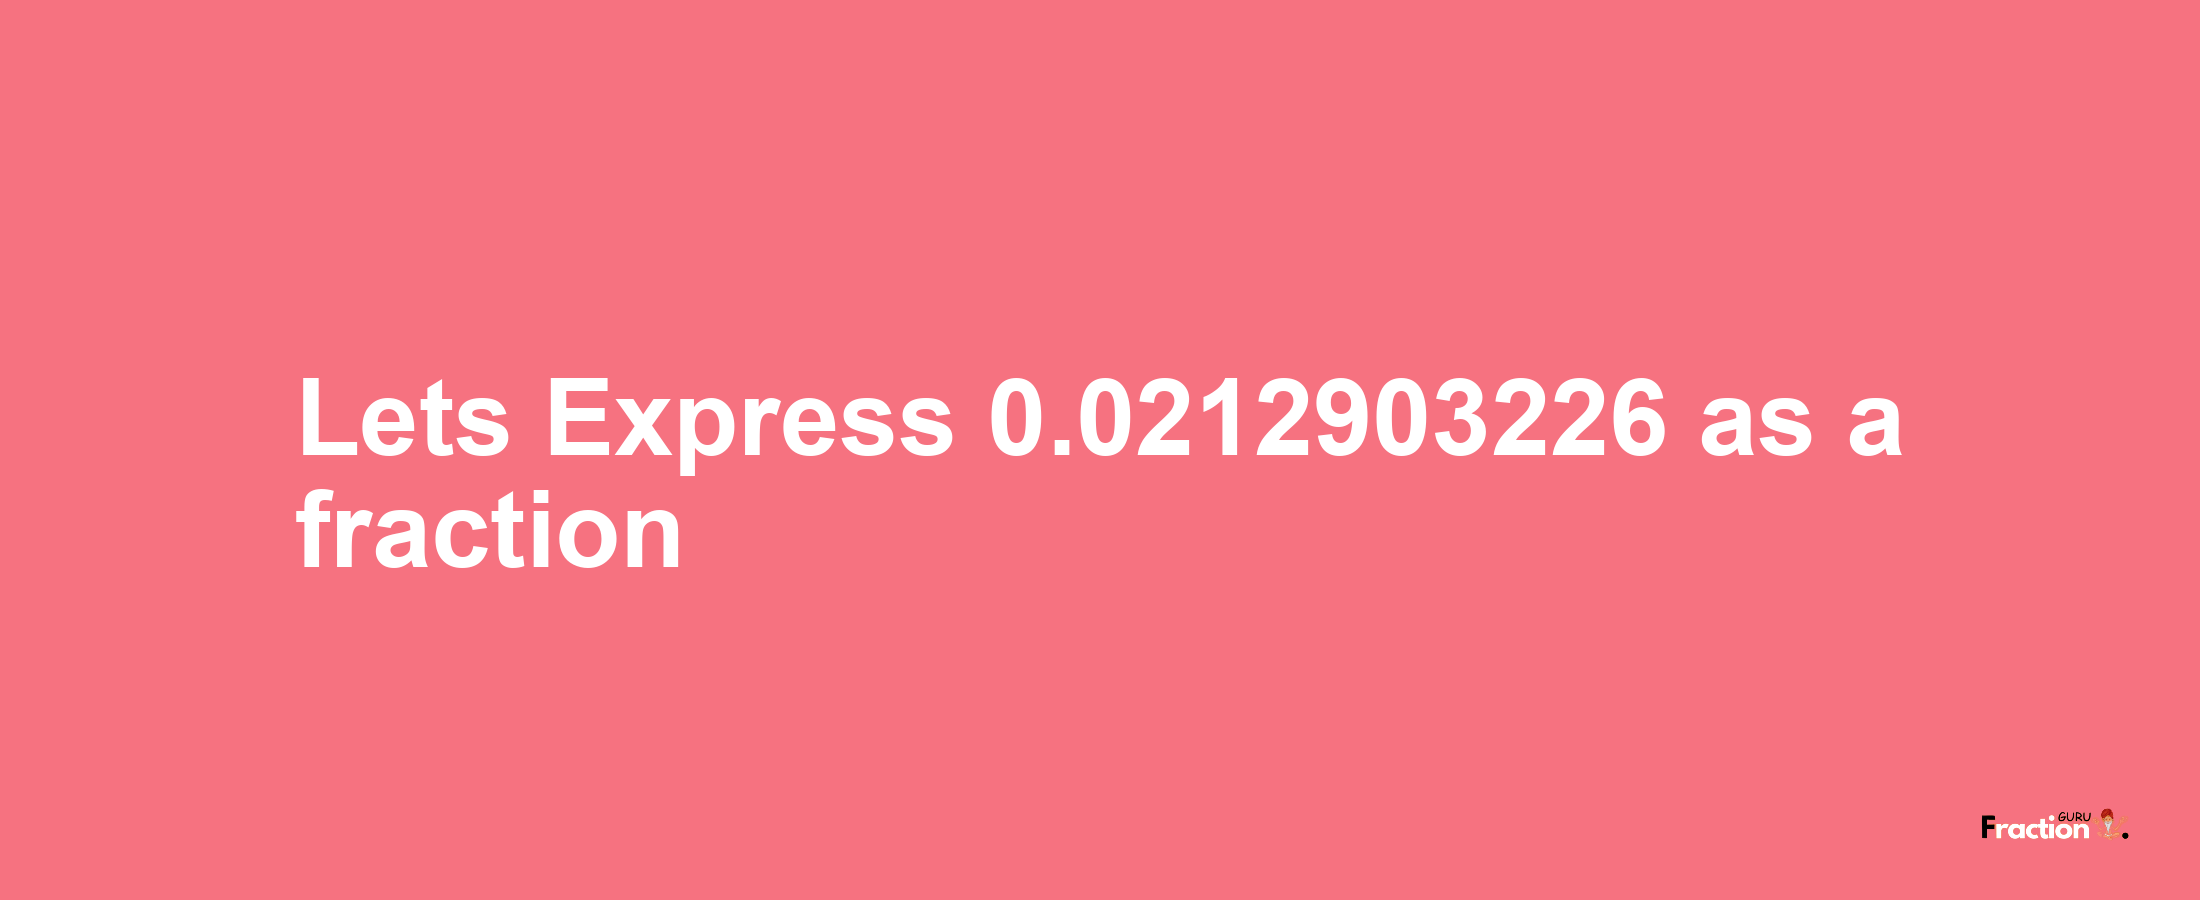 Lets Express 0.0212903226 as afraction